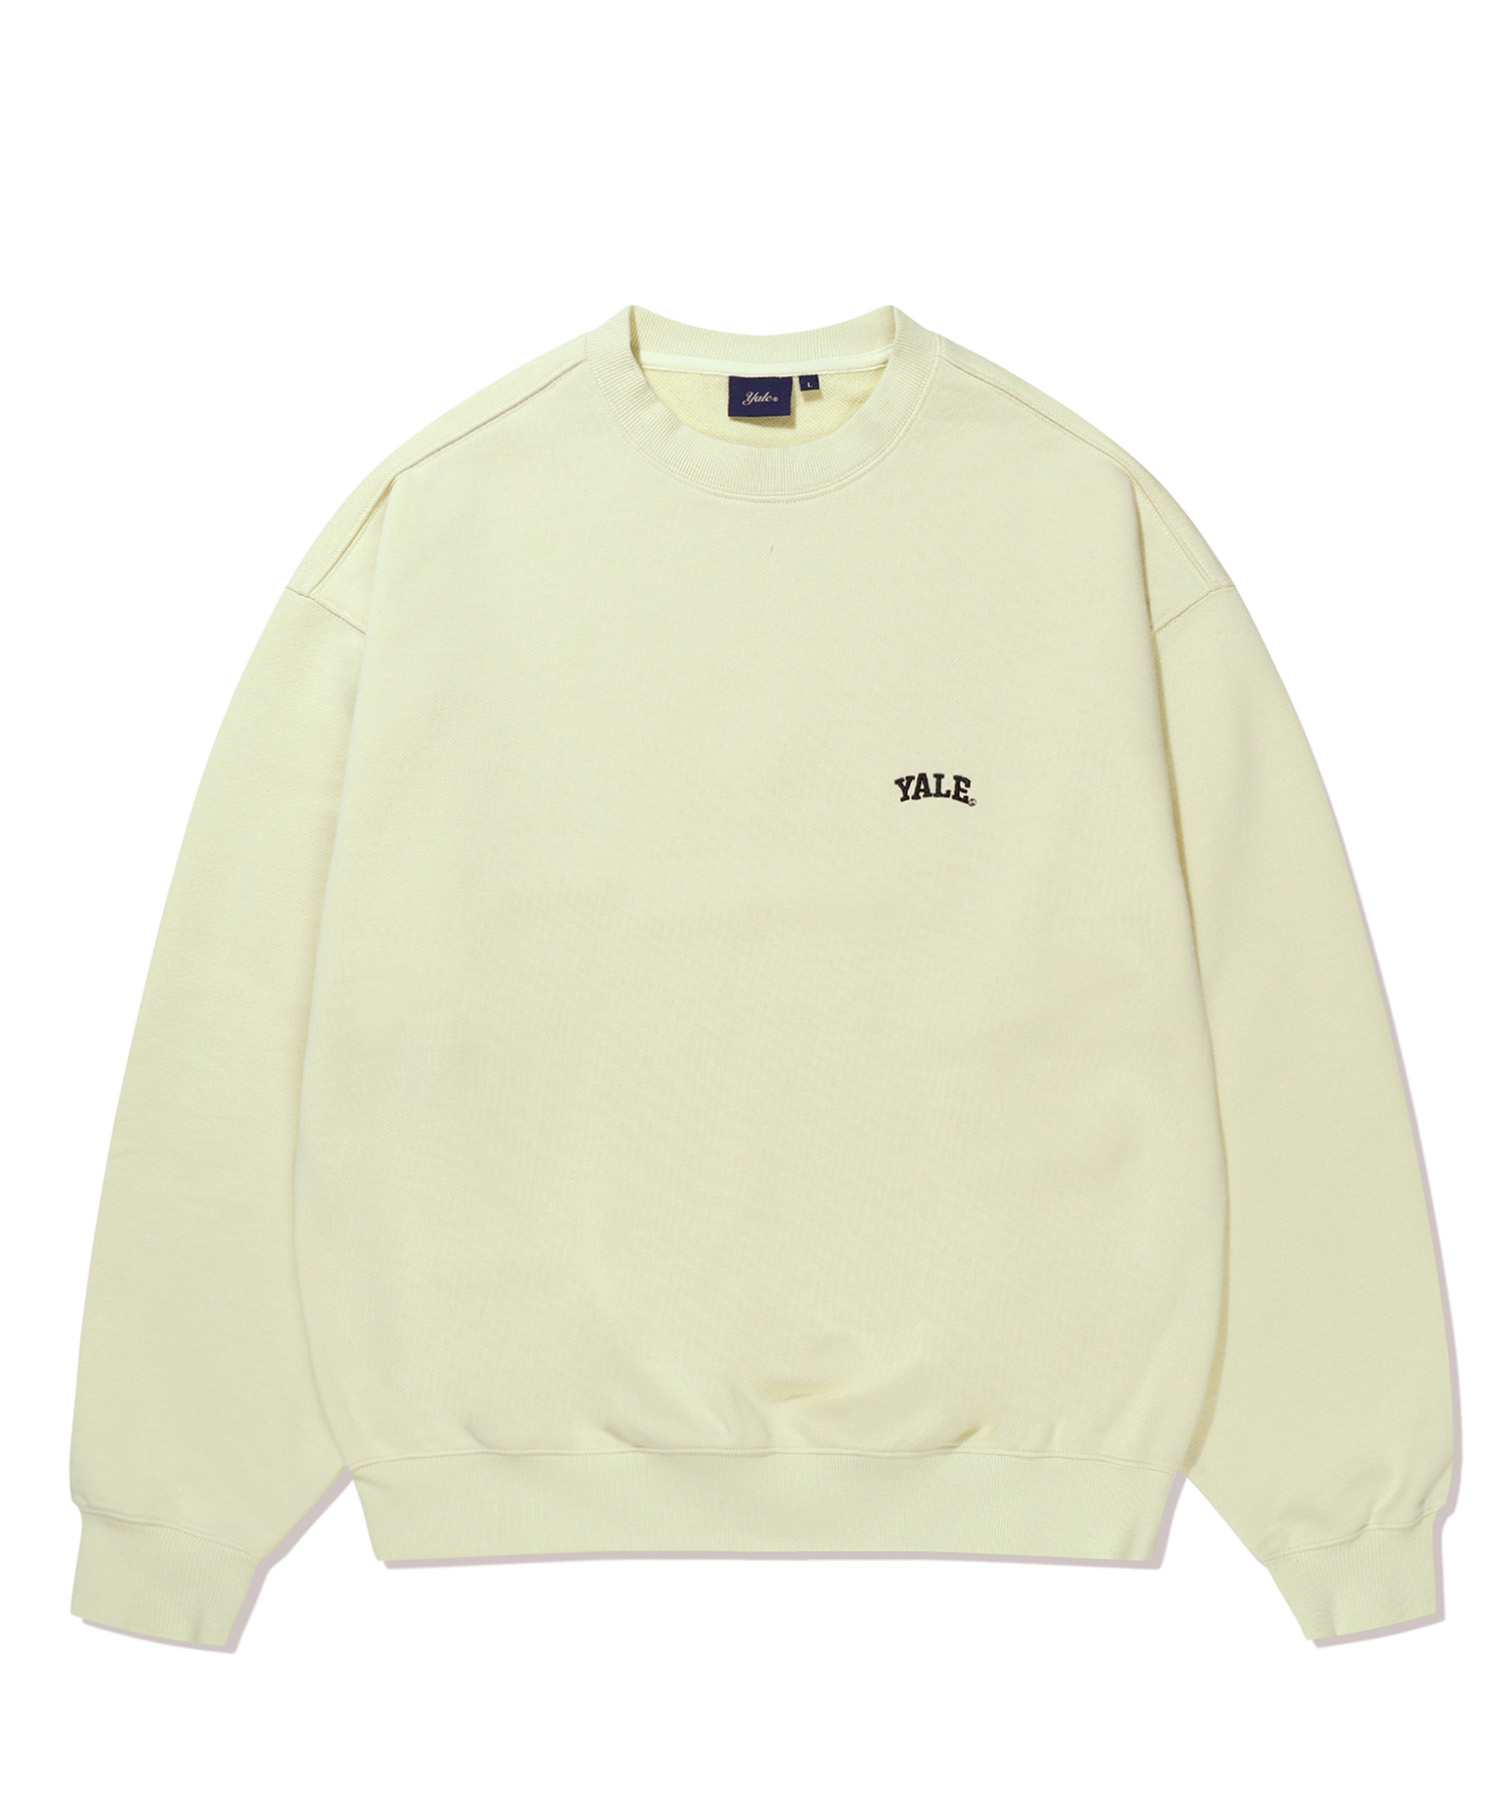 (23FW) [ONEMILE WEAR] SMALL ARCH CREWNECK LIGHT YELLOW